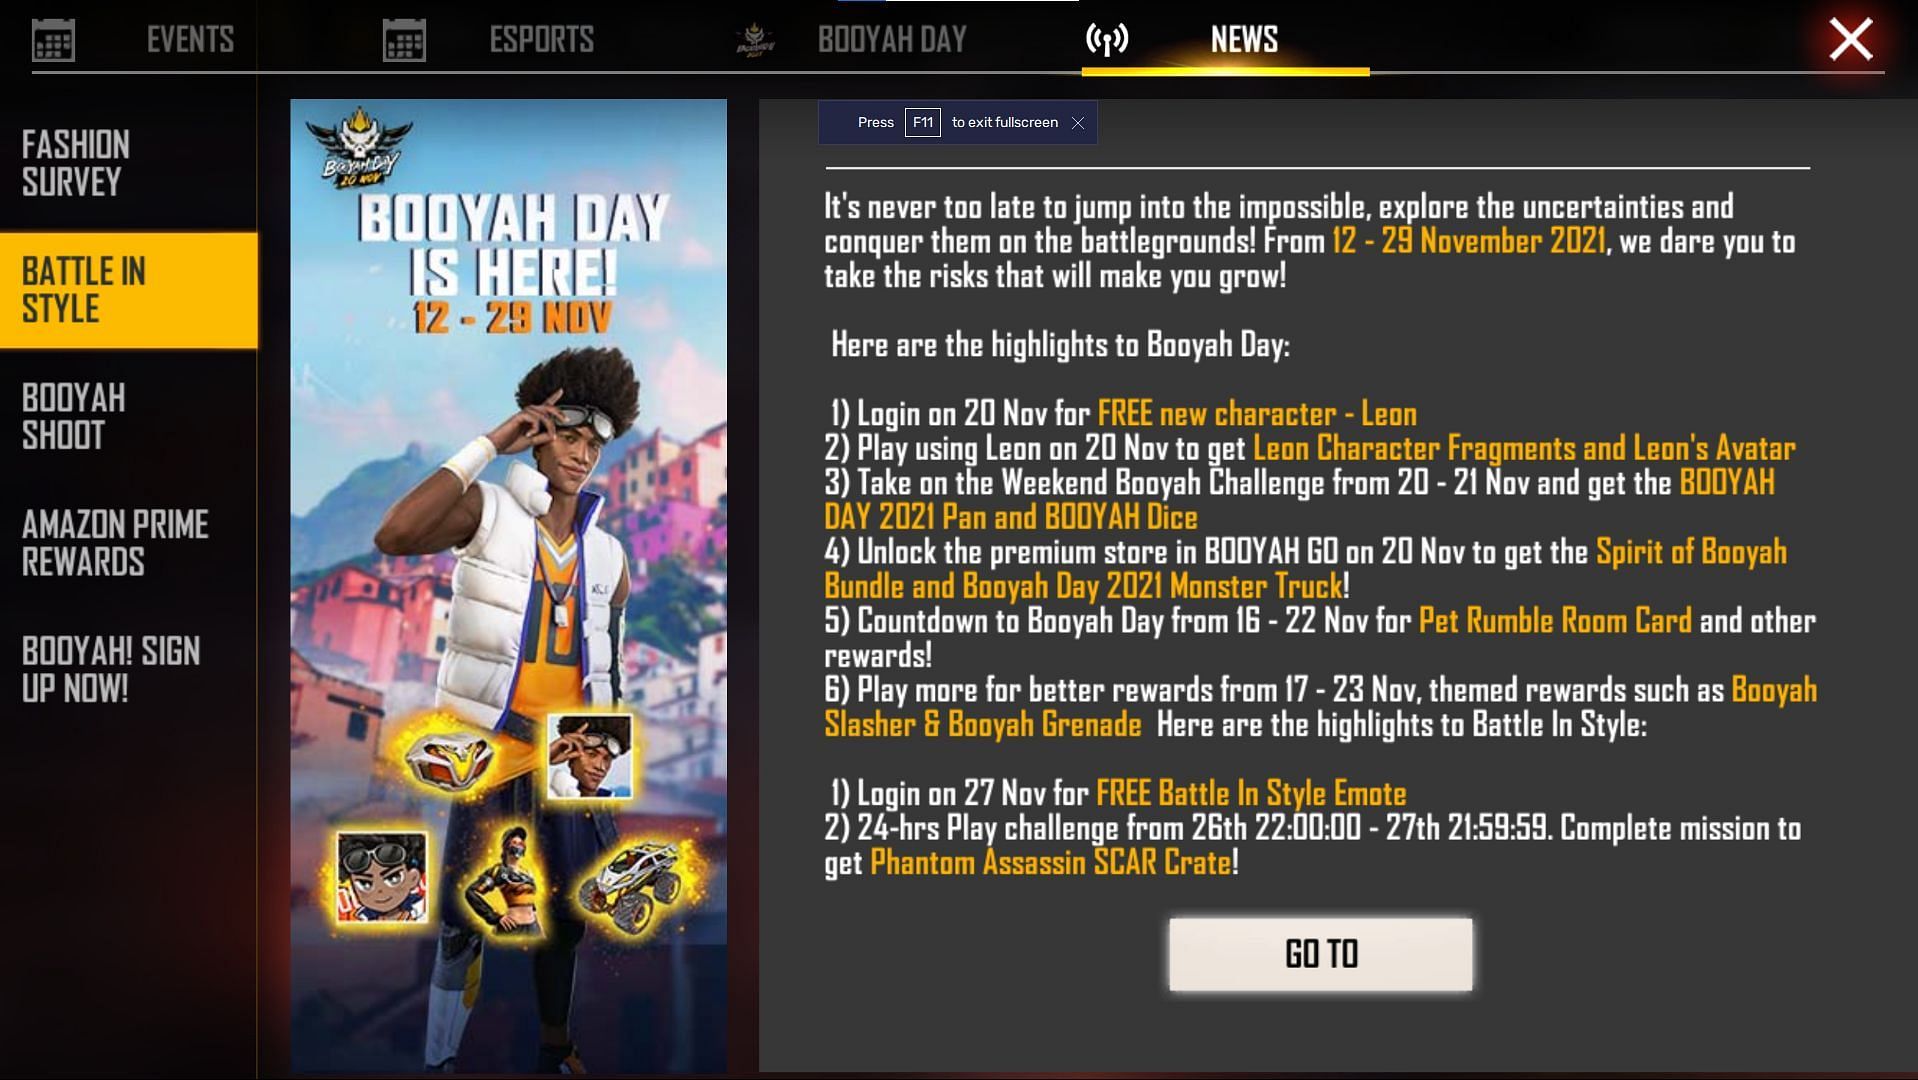 As a login reward, the emote will be available to players (Image via Free Fire)